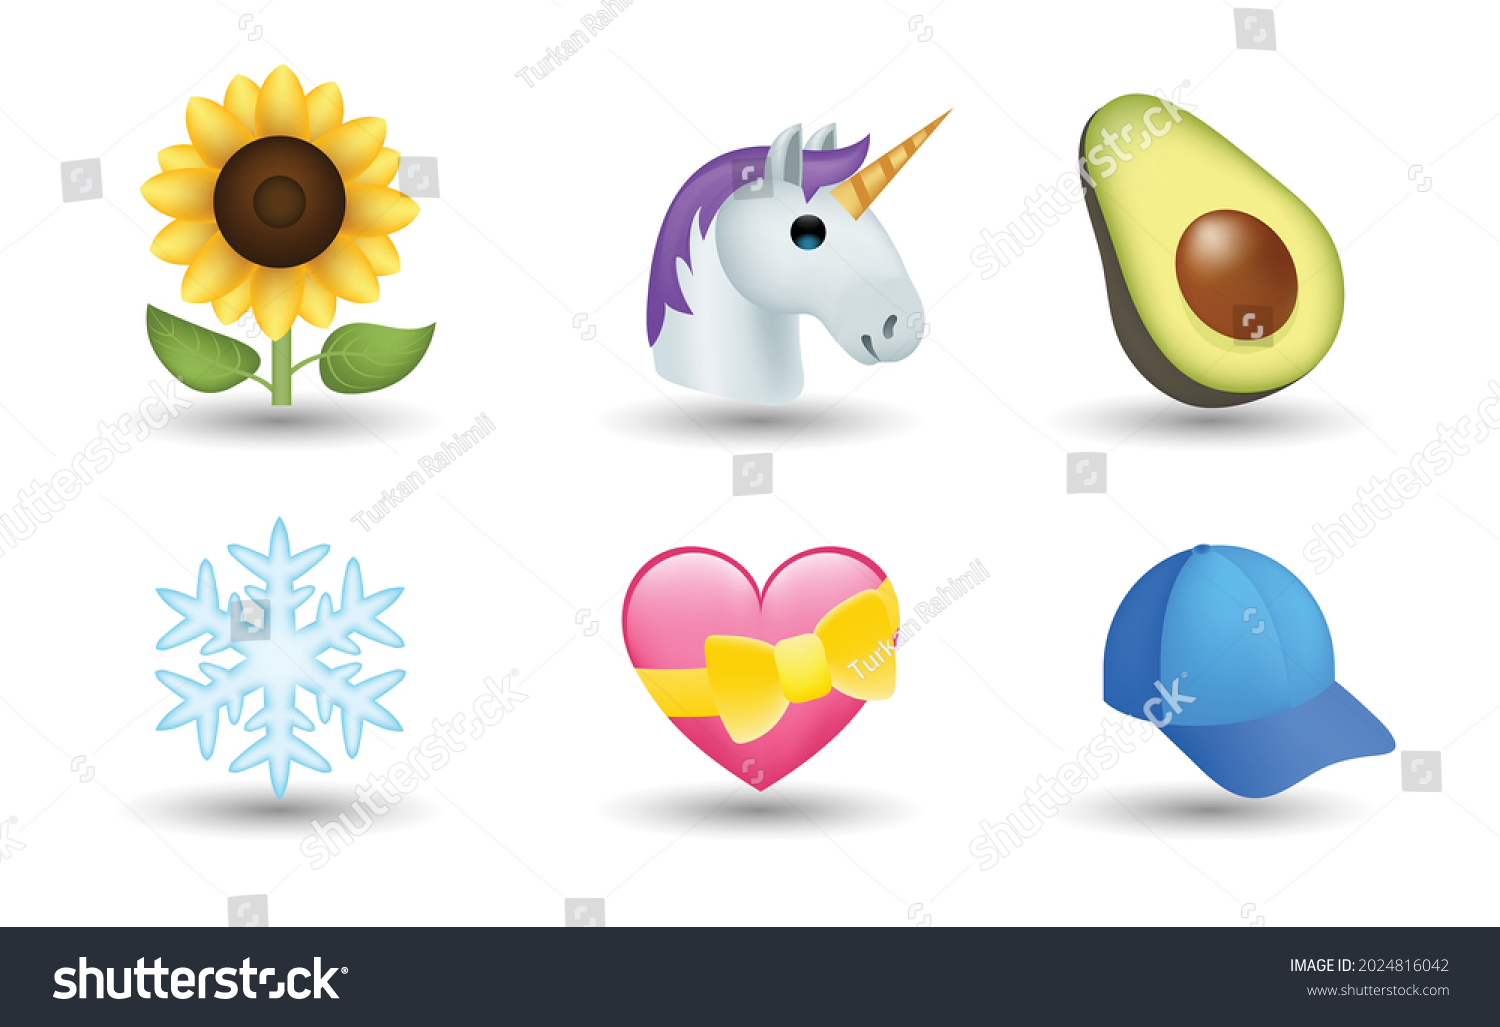 SVG of 6 Emoticon isolated on White Background. Isolated Vector Illustration. Sunflower, unicorn, avocado, snowflake, pink heart with yellow ribbon, summer hat vector emoji Illustration. 3d Illustration.  svg